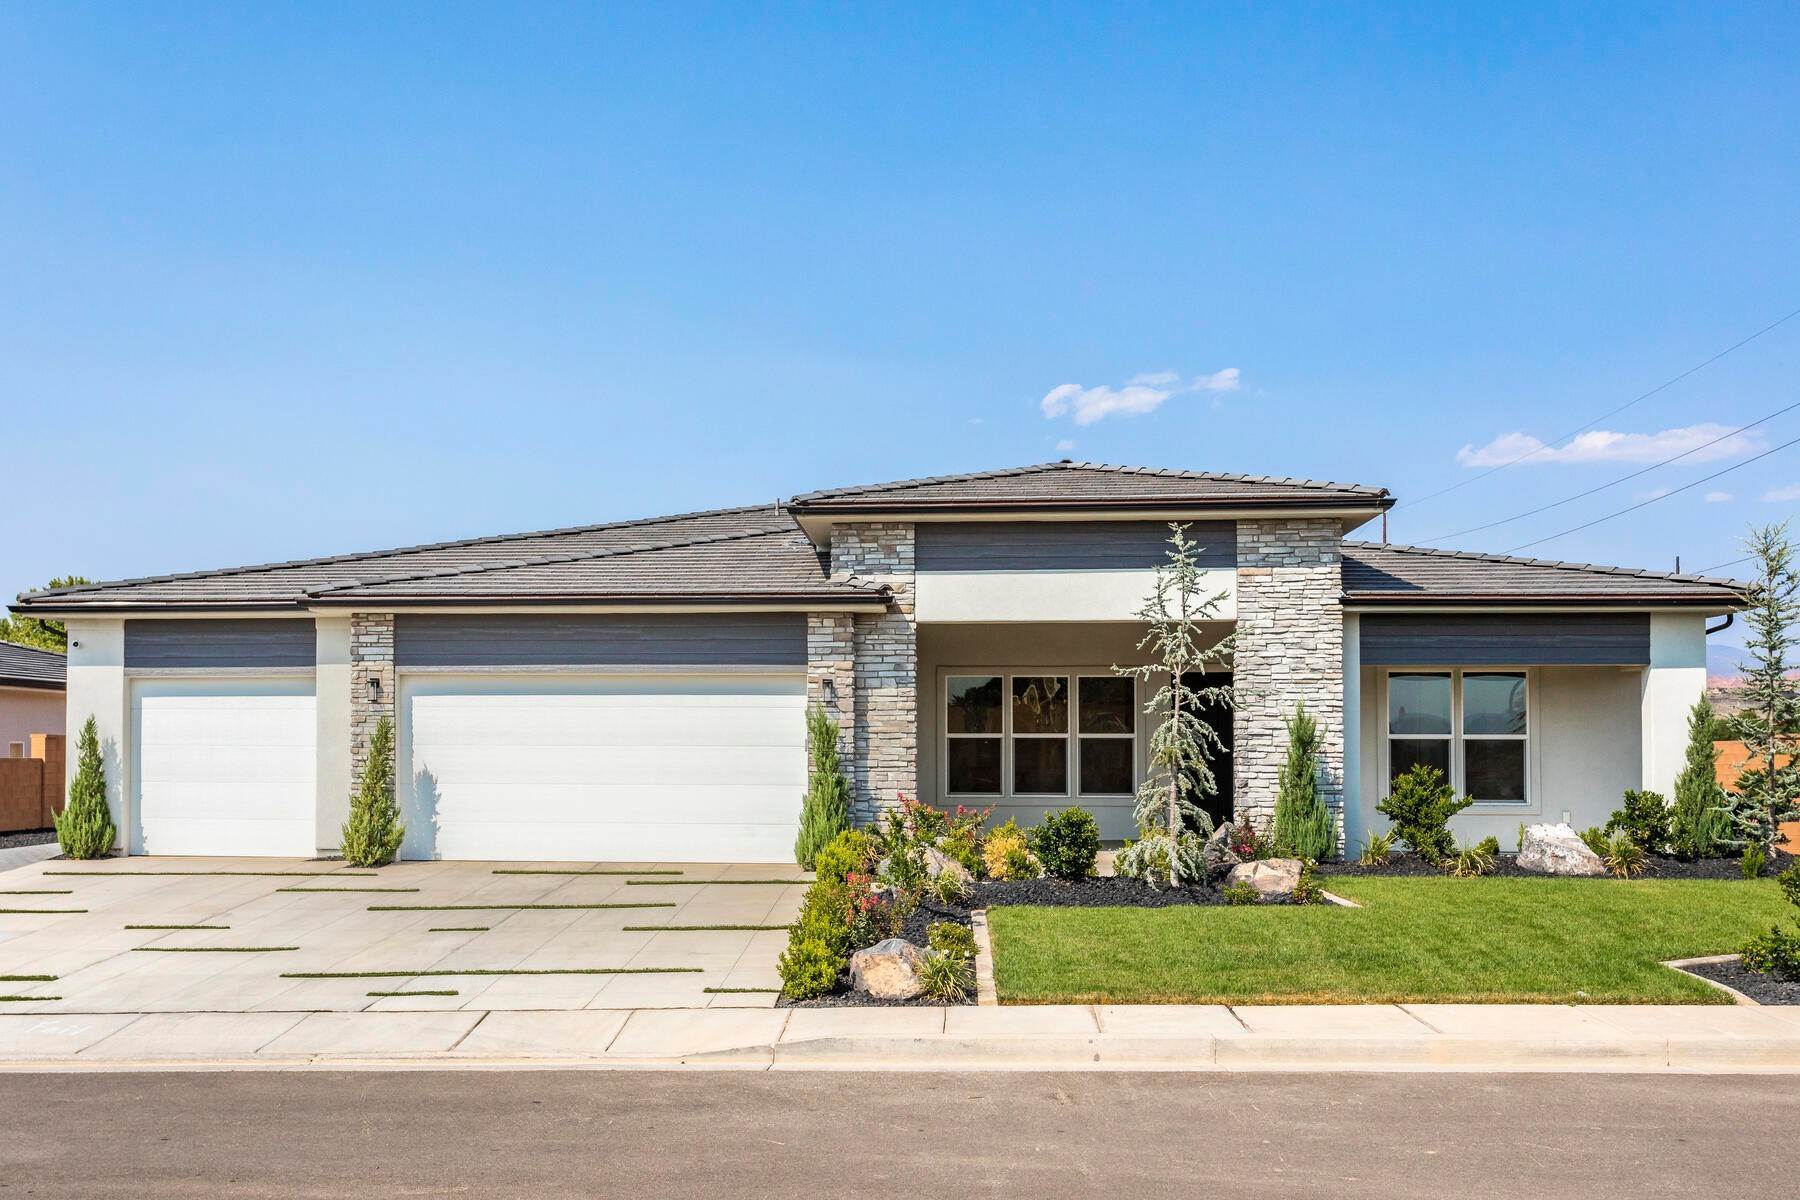 Single Family Homes for Sale at New Construction Two-Story Single Family Home Available in Whitworth Estates! 74 W Elinor Lane (Lot #5) Washington, Utah 84780 United States